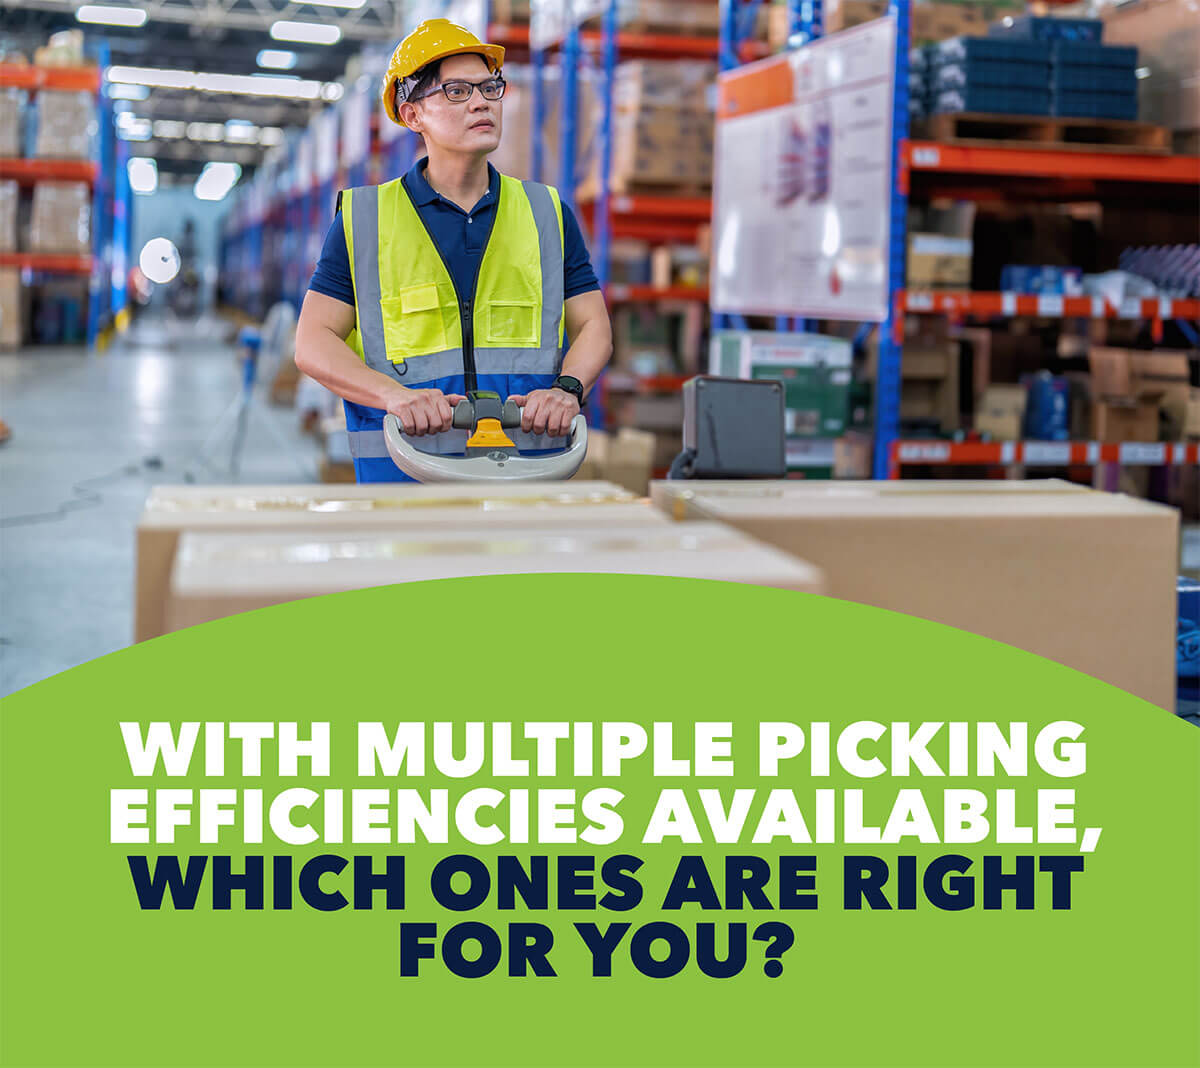 With multiple picking efficiencies available, which ones are right for you?